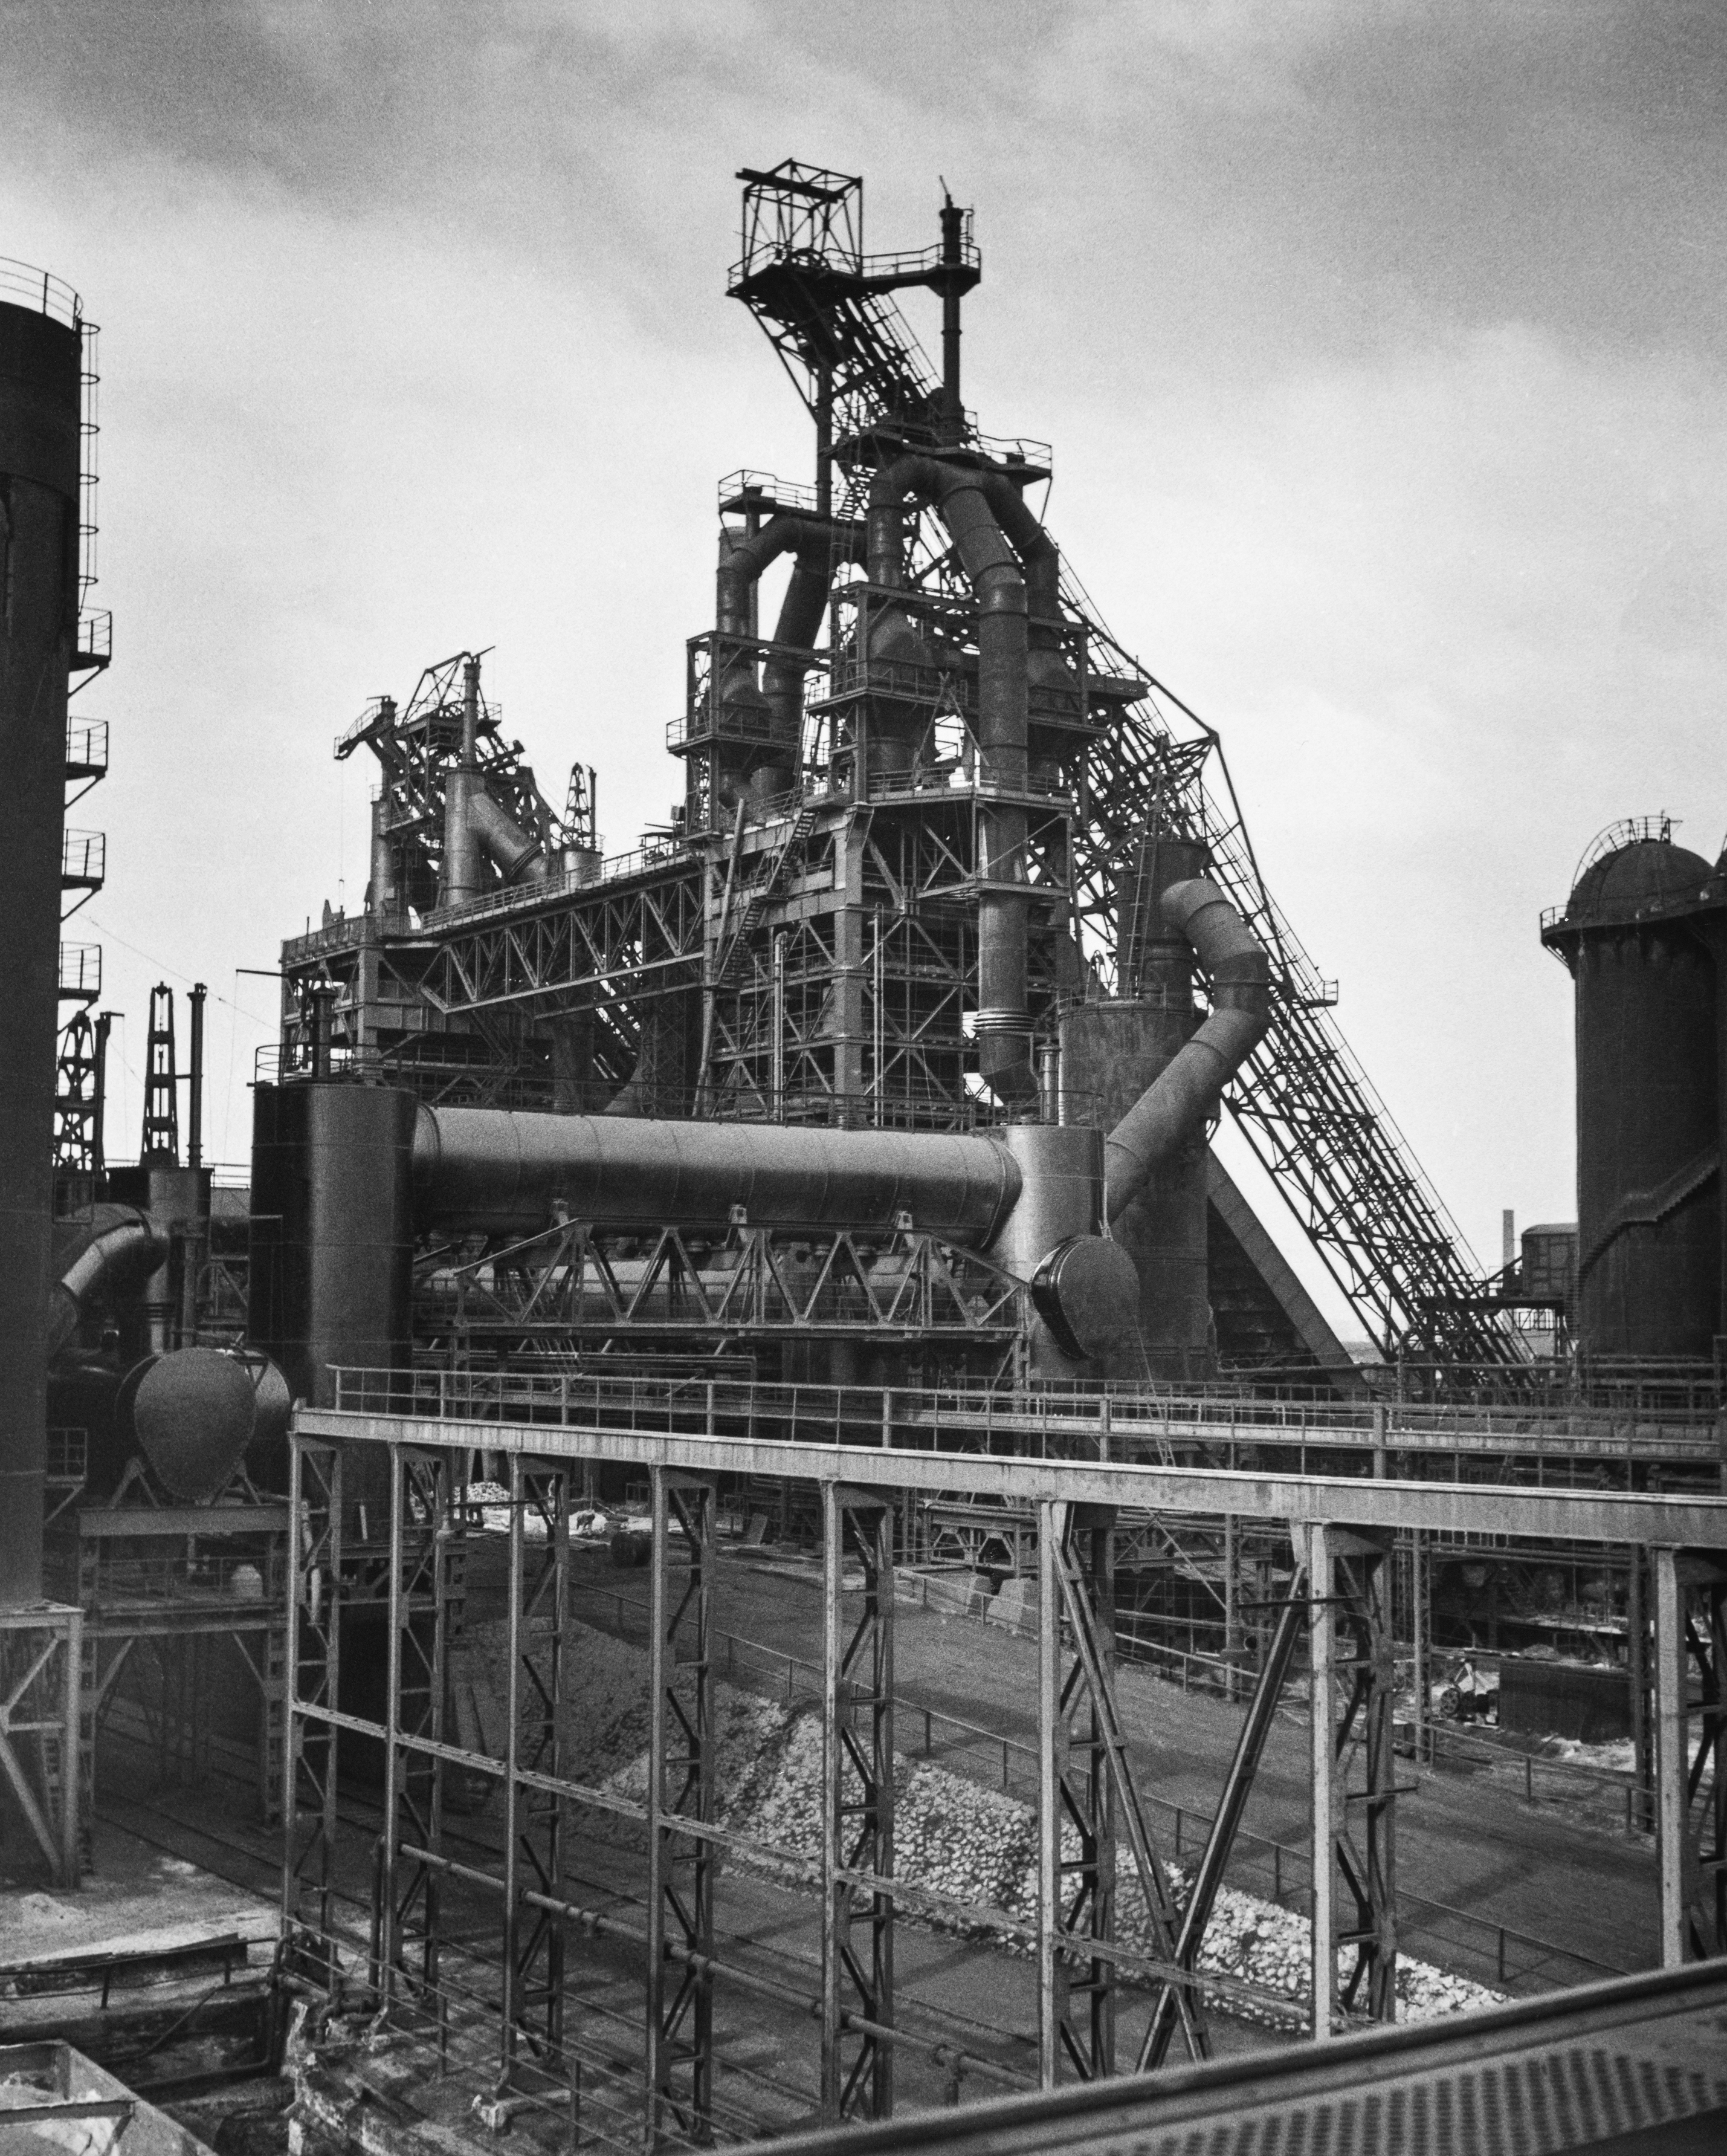 Industrial plant photographed in black and white